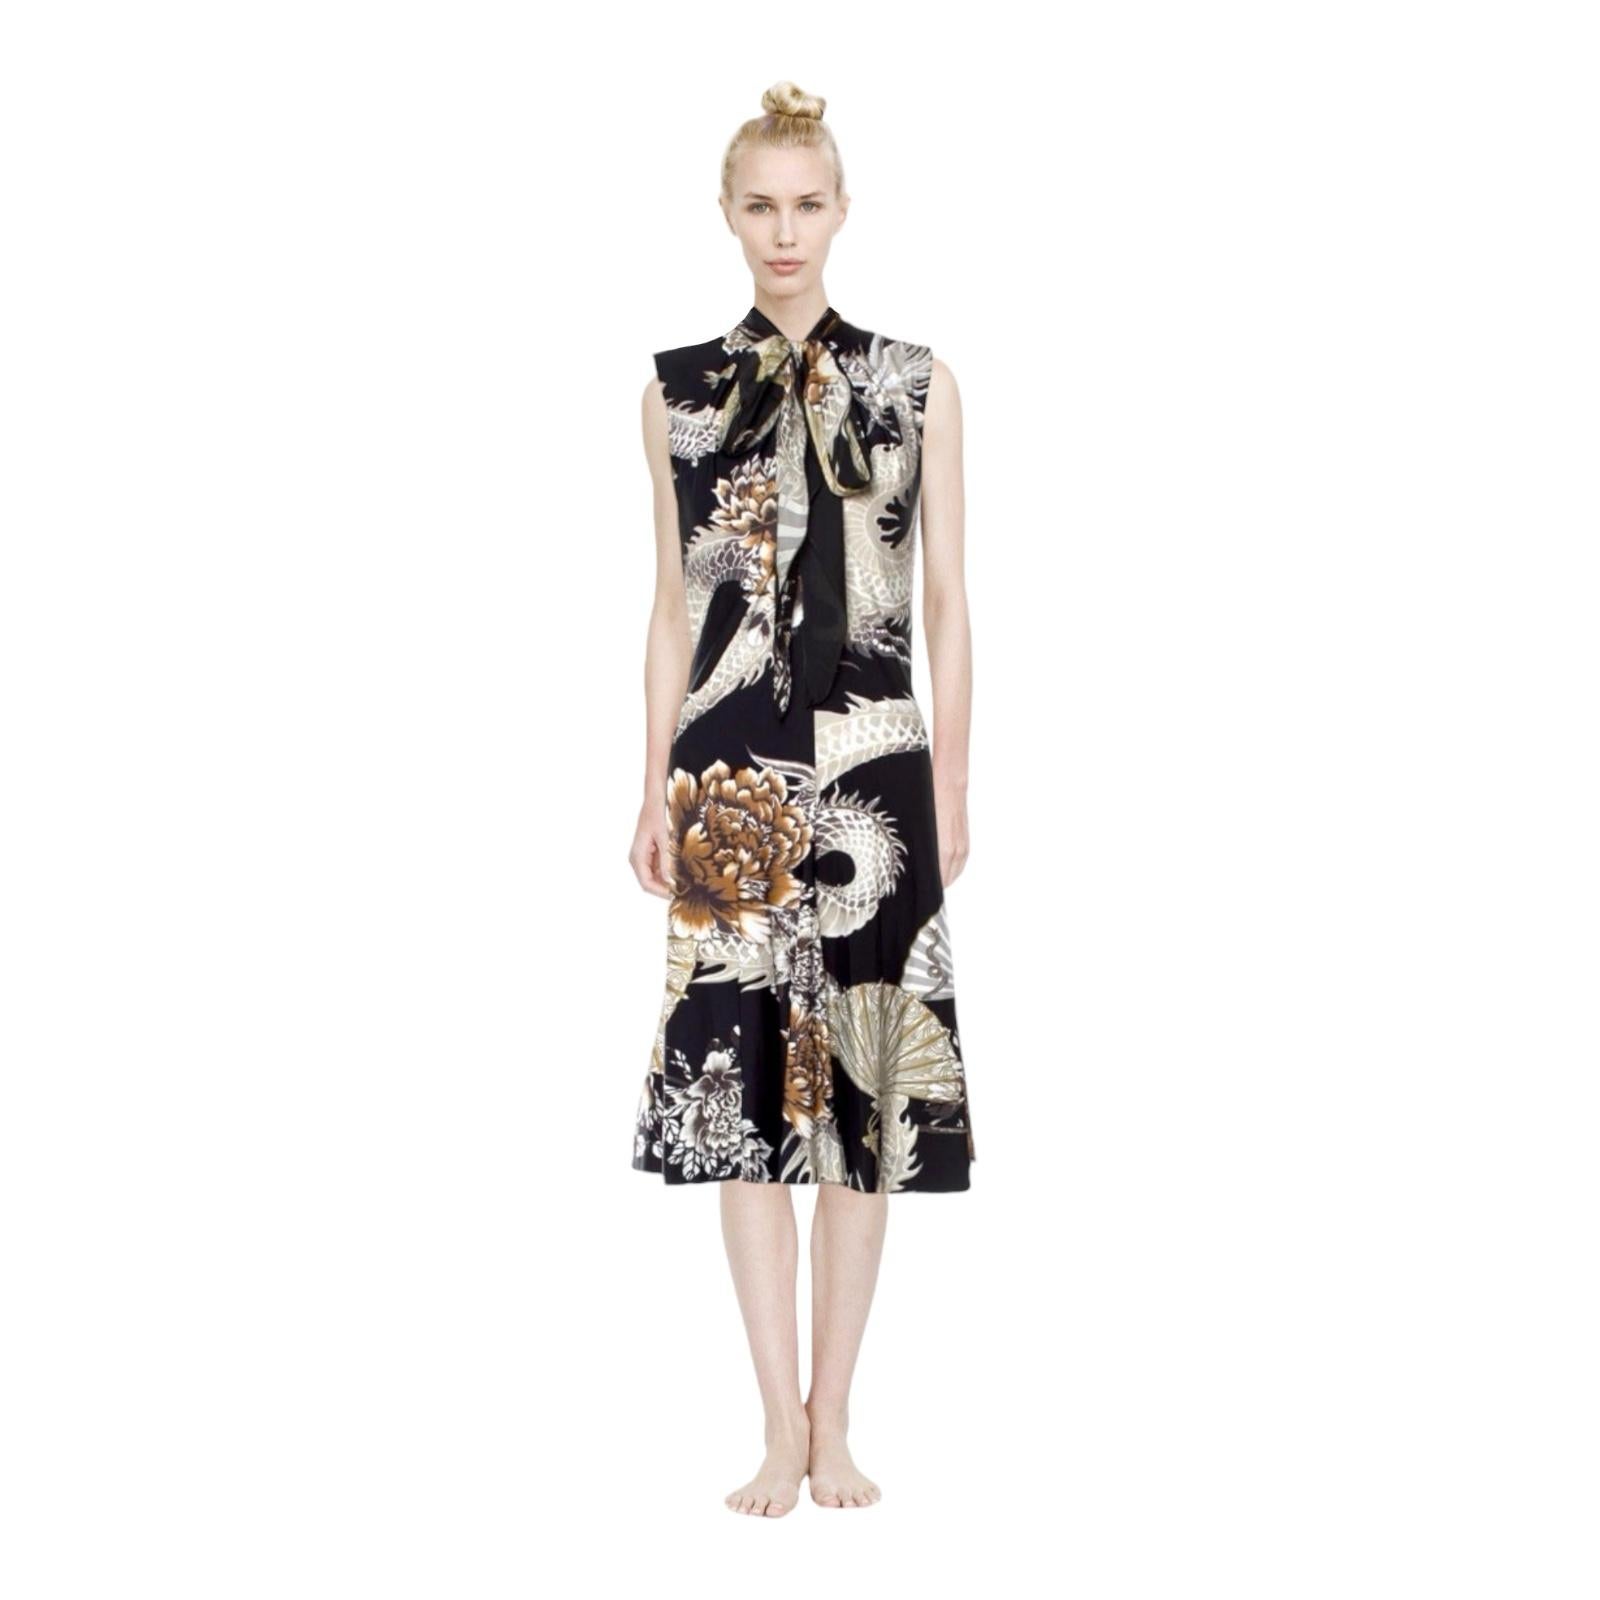 ROBERTO CAVALLI 2006 Chinoiserie Dragon Fan Print Dress with Scarf Detail 44 For Sale 10